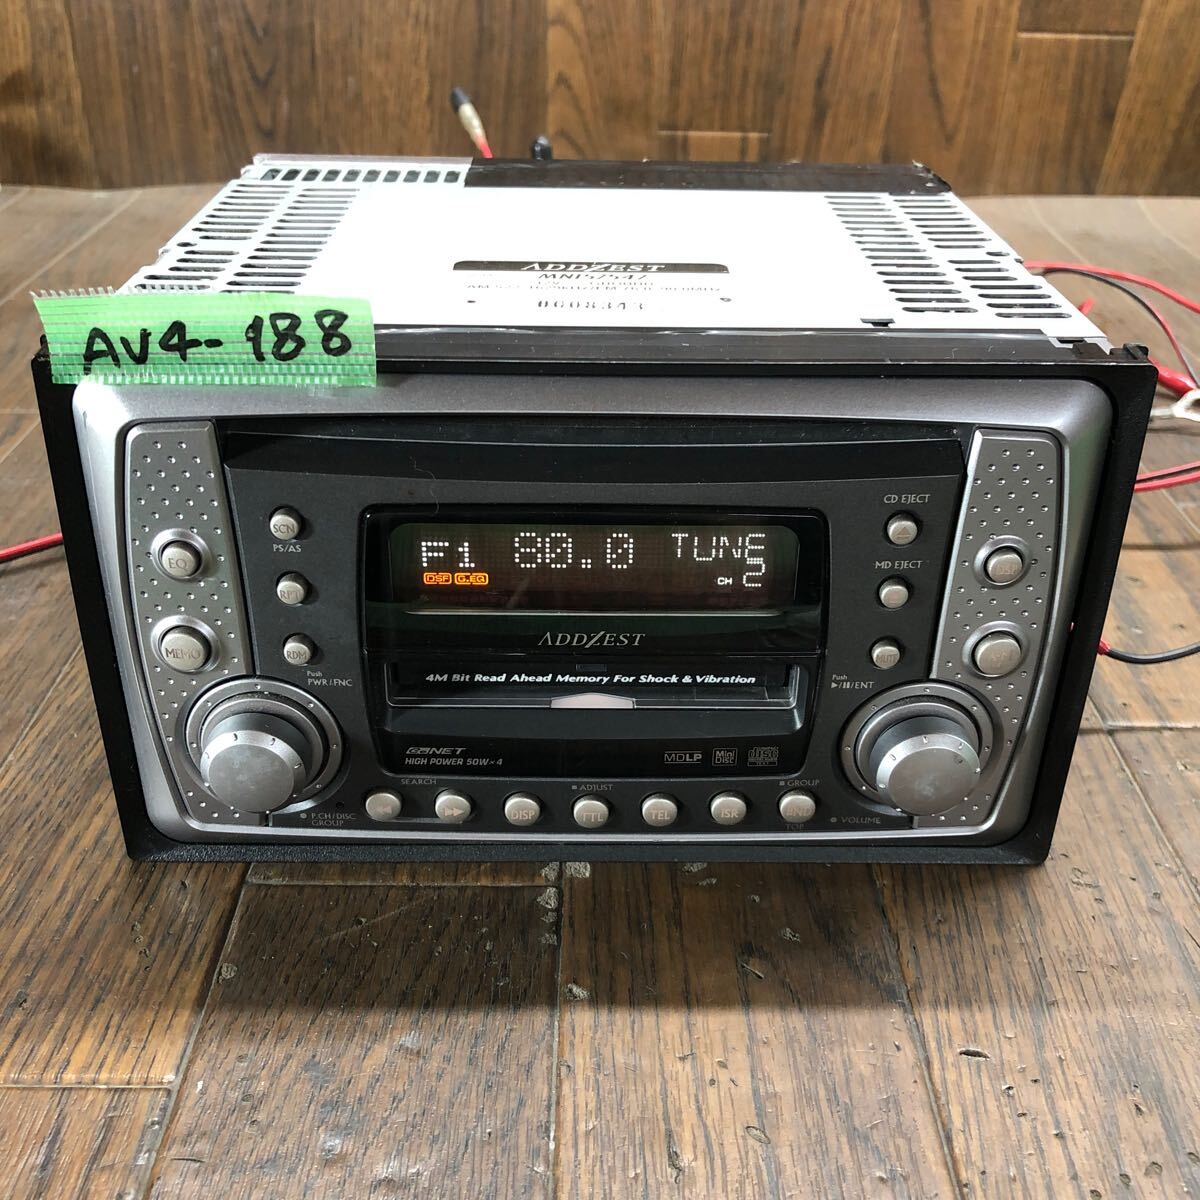 AV4-188 super-discount car stereo ADDZEST MN157547 0008343 CD MD FM/AM player receiver simple operation verification ending used present condition goods 